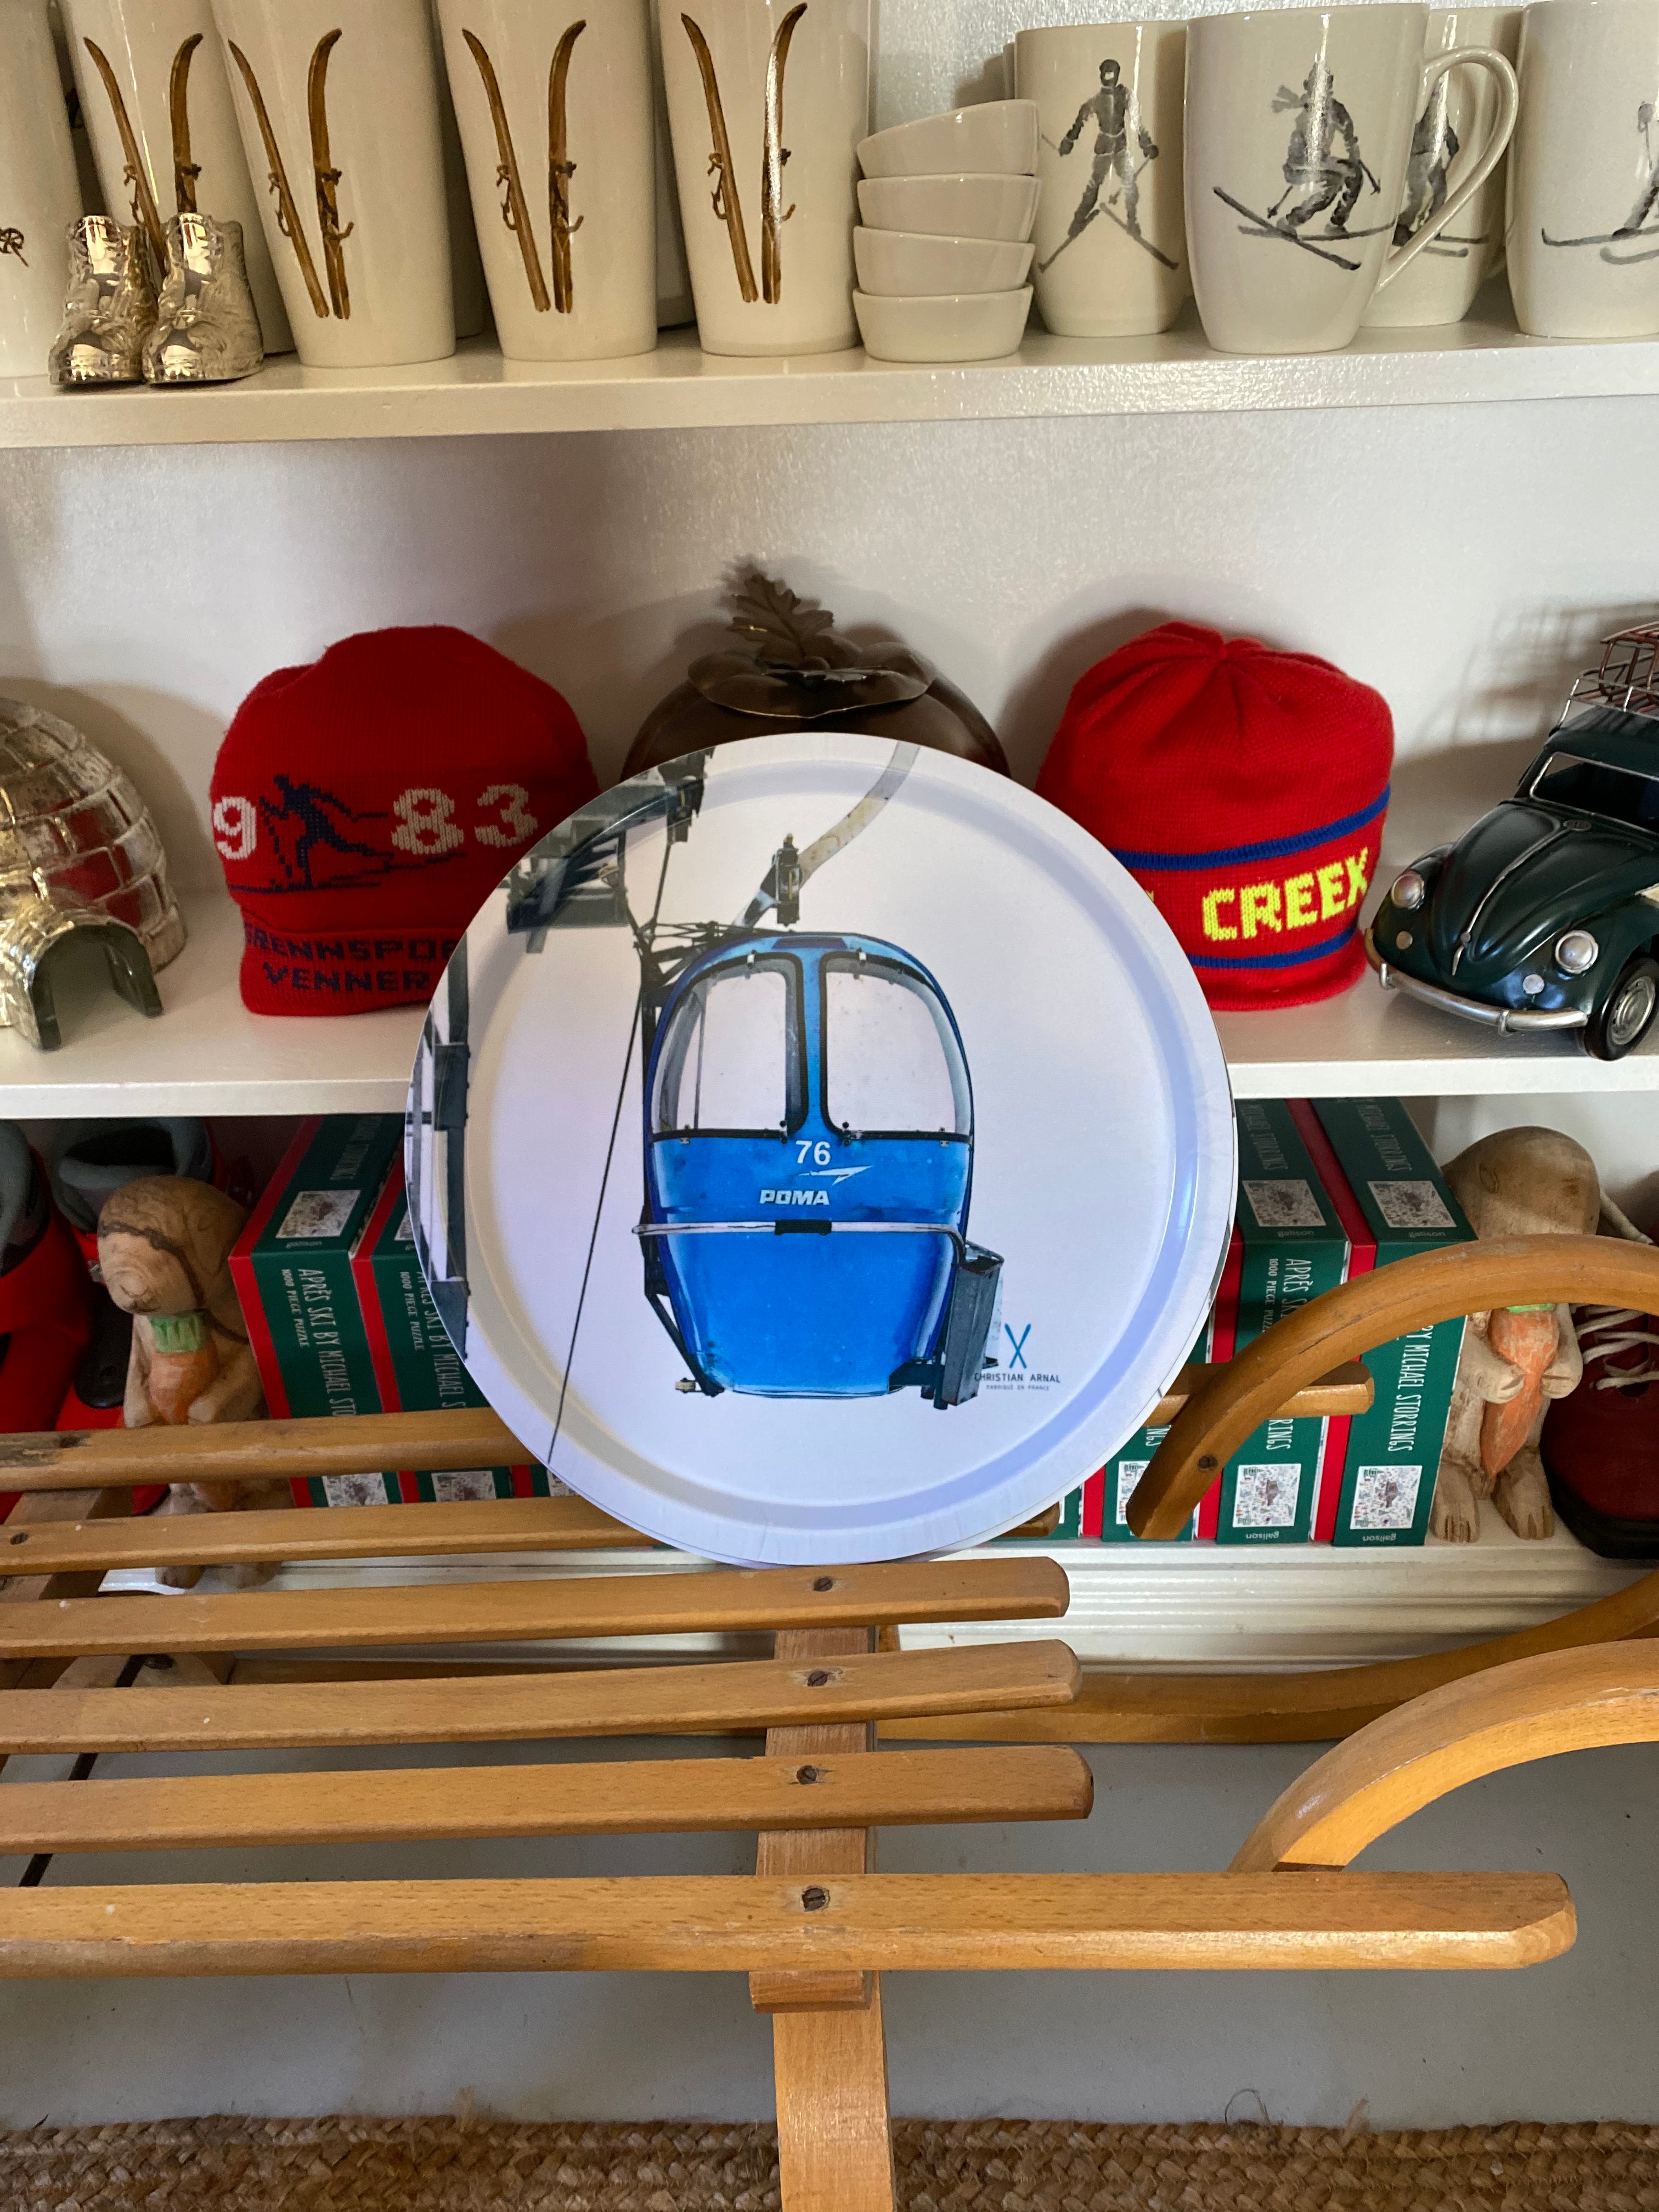 Photo of a Blue Vintage Gondola printed onto a Round White Serving Tray, resting on a vintage wooden sled in front of a white bookshelf filled with snow related products